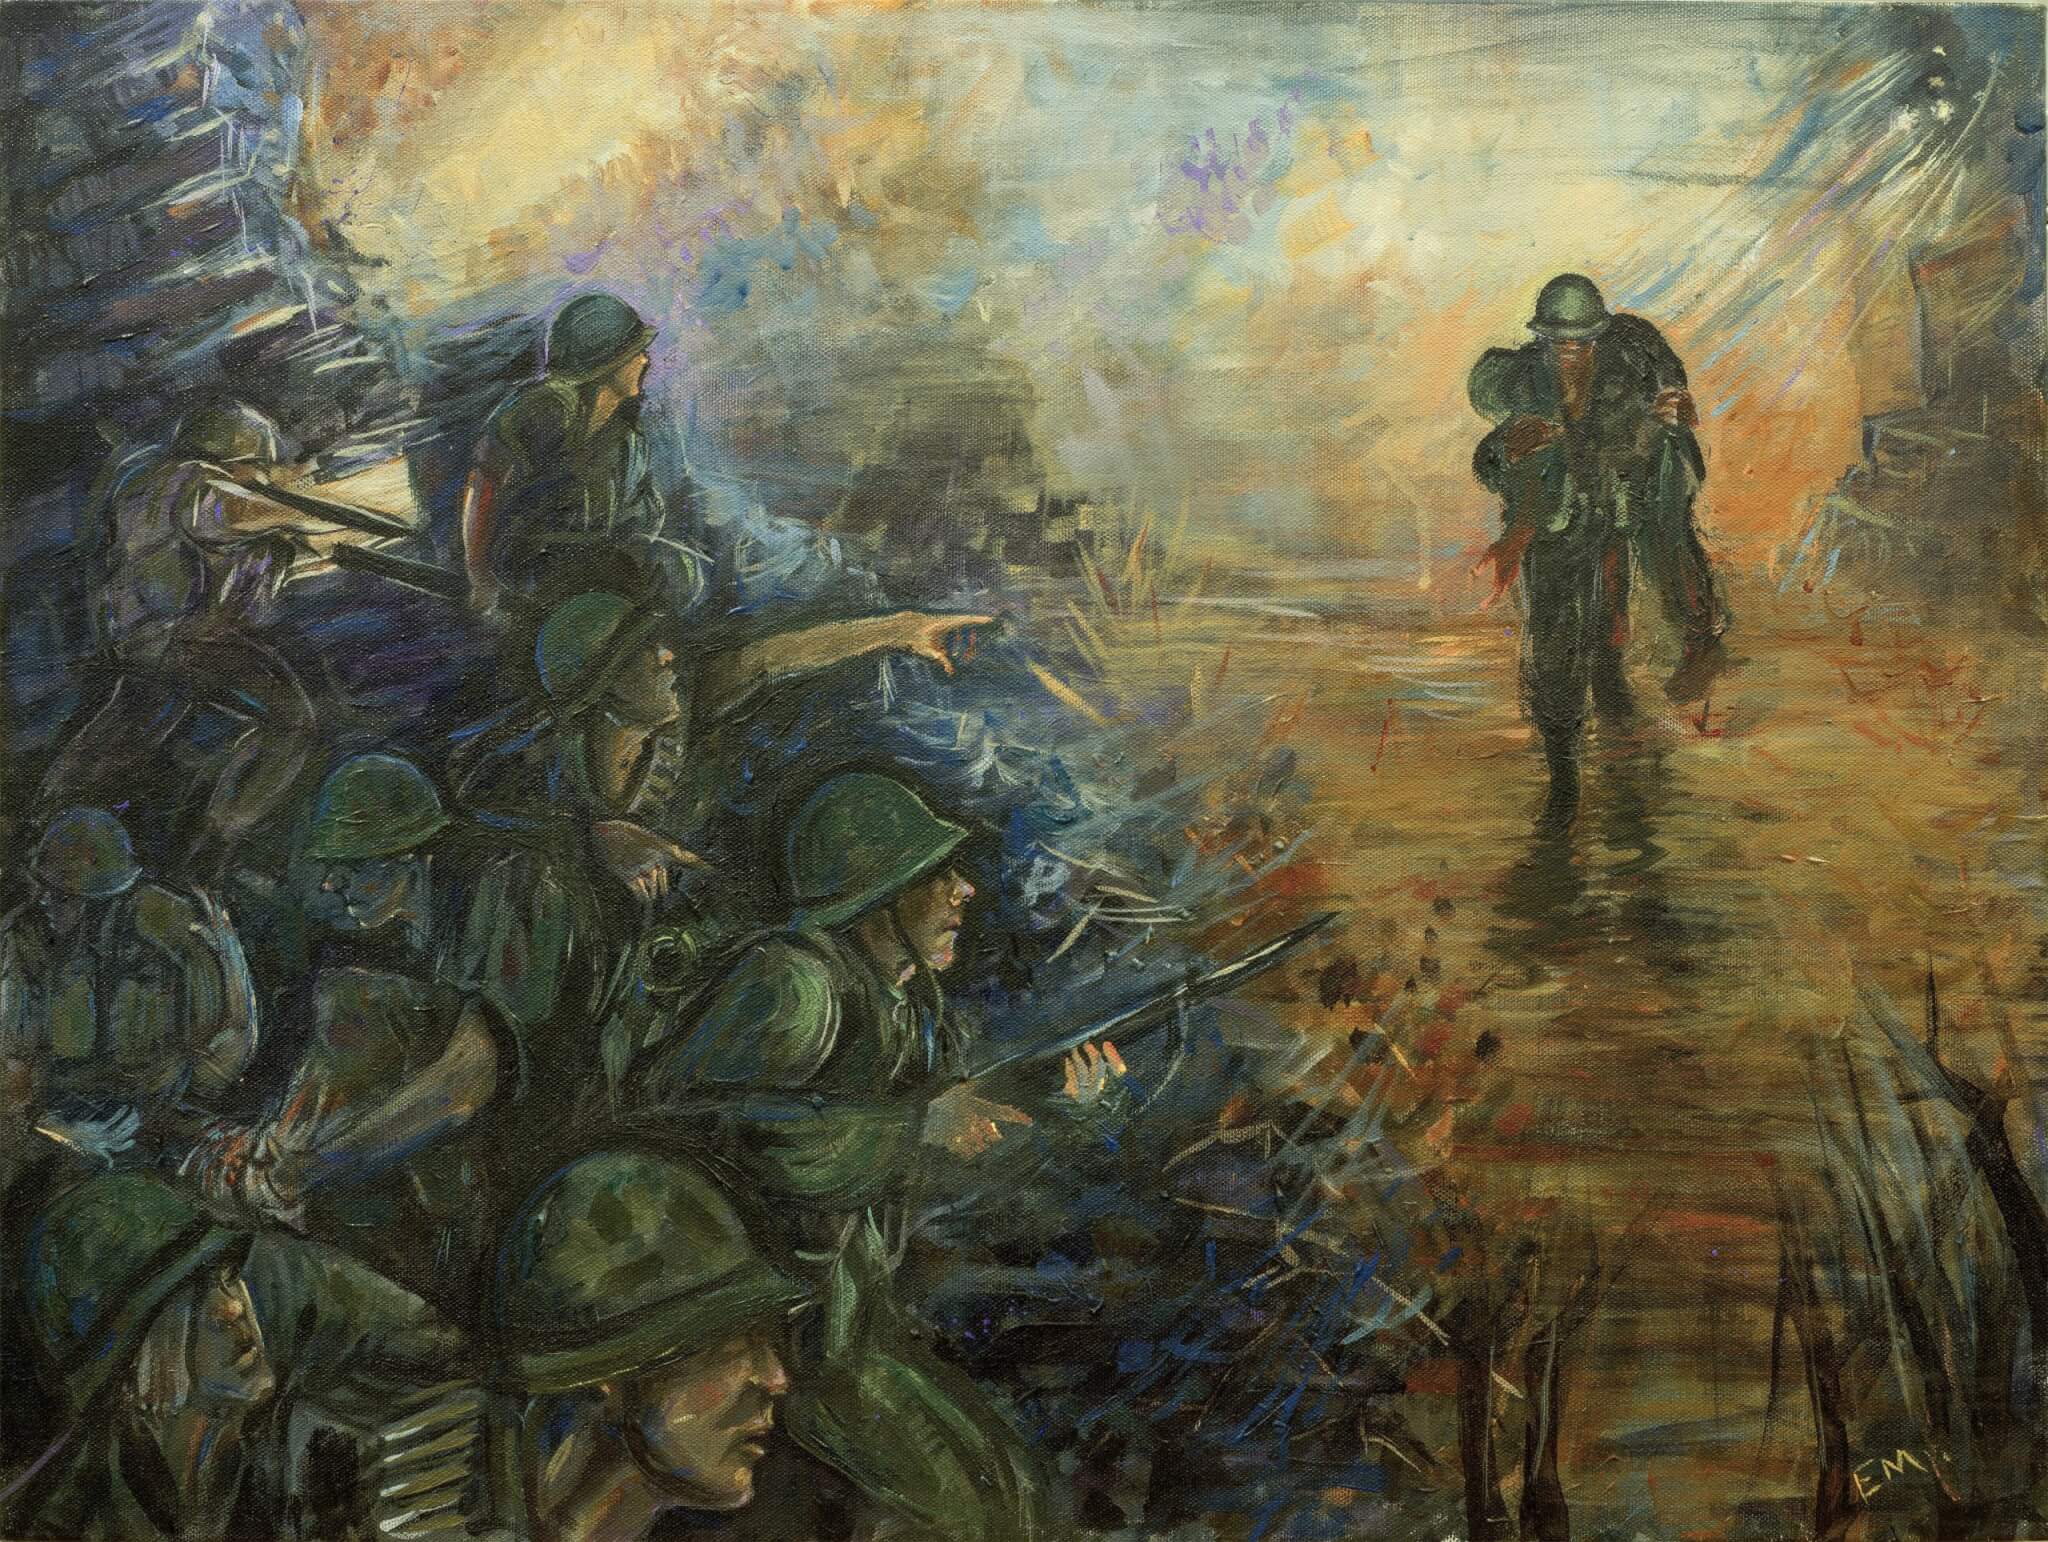 Acrylic painting of retired Sgt Maj. John L. Canley in Hue City. U.S. Marine Corps illustration by Sgt. Elize McKelvey.